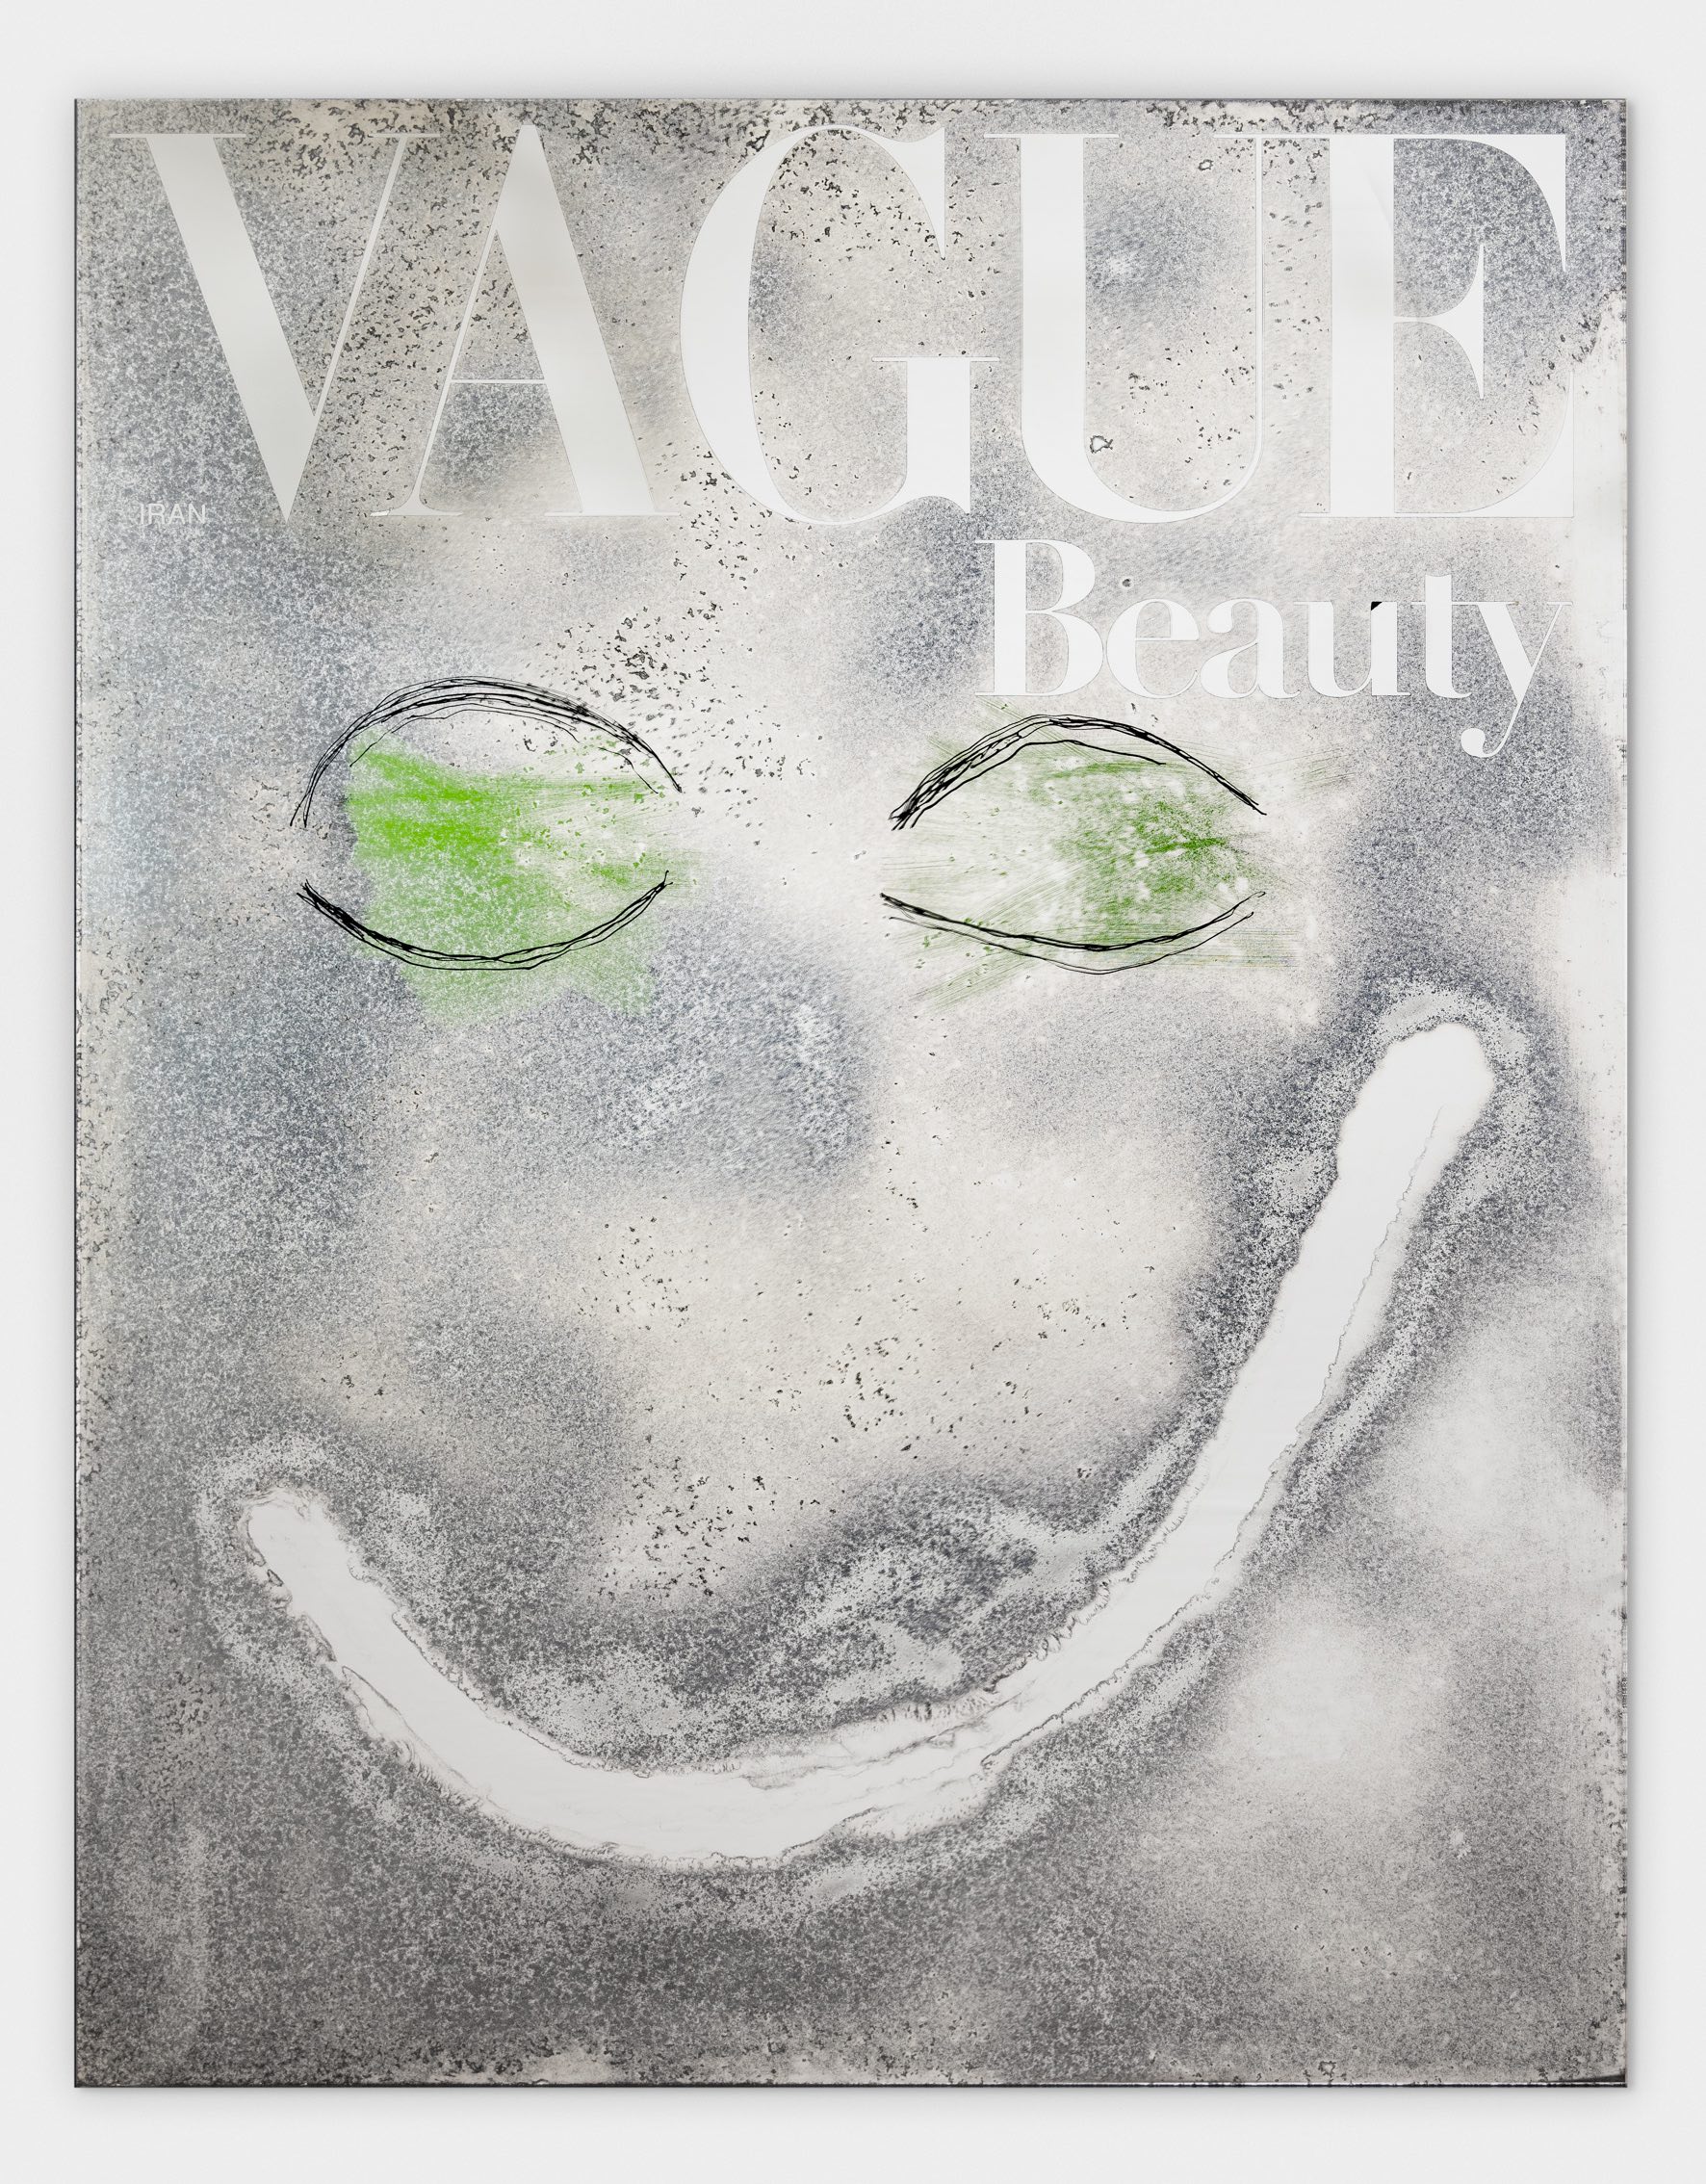 VAGUE BEAUTY ISSUE – IRAN (First Edition)